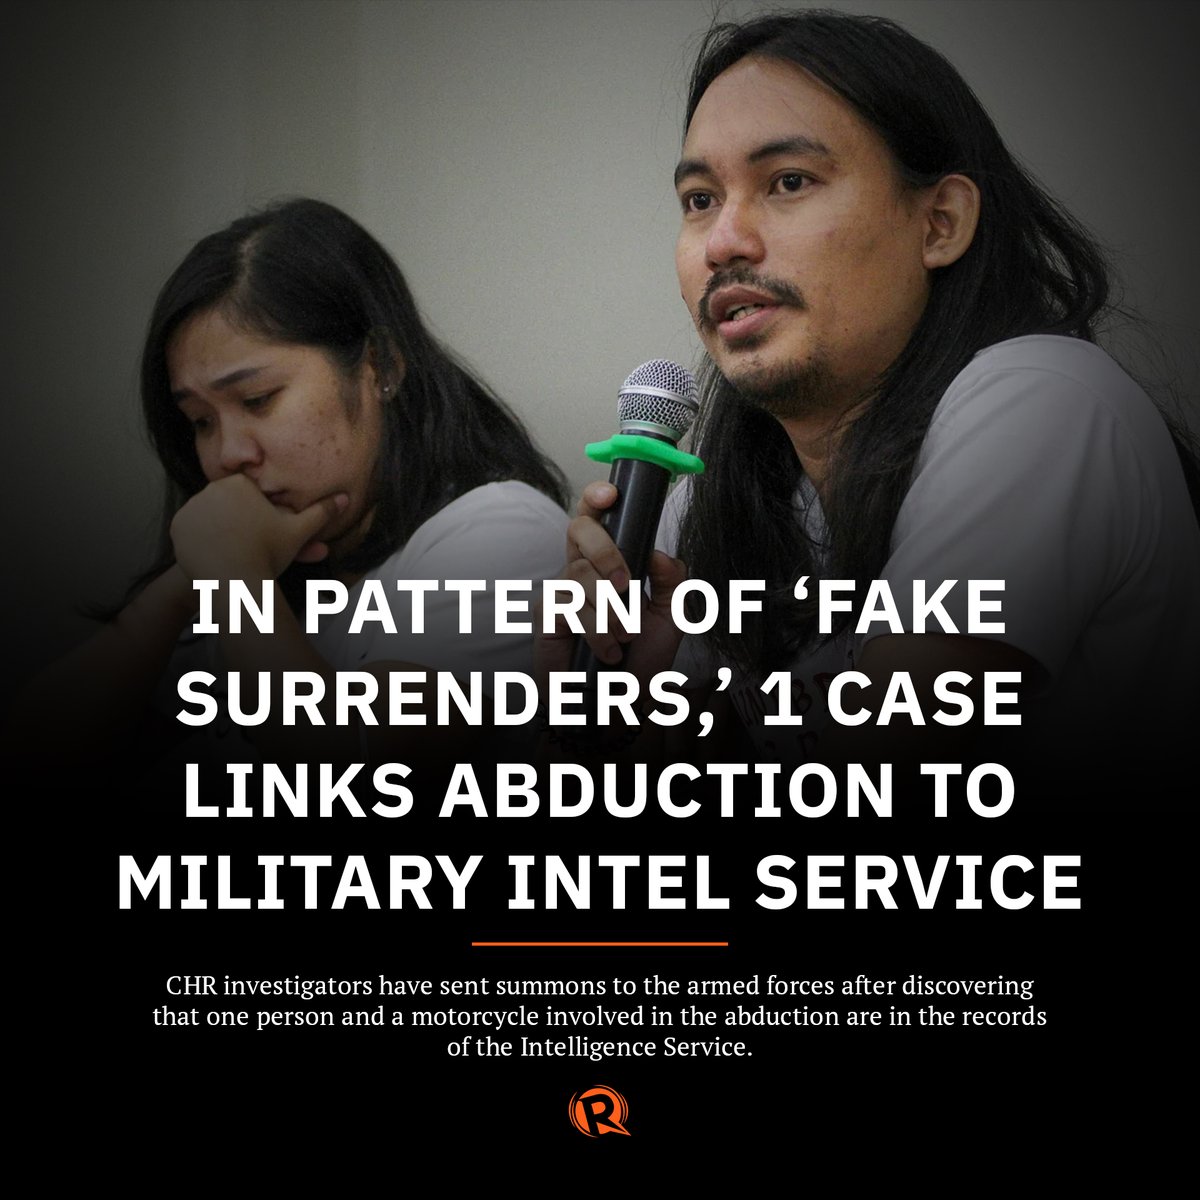 EXCLUSIVE: An imperfect crime, the wrong victims, and a CCTV are what may crack these cases open as the CHR reaches a rare stage. Rappler has learned that the CHR found solid links to the case of Dyan Gumanao and Armand Dayoha's abduction. READ: trib.al/MU1Jkc4